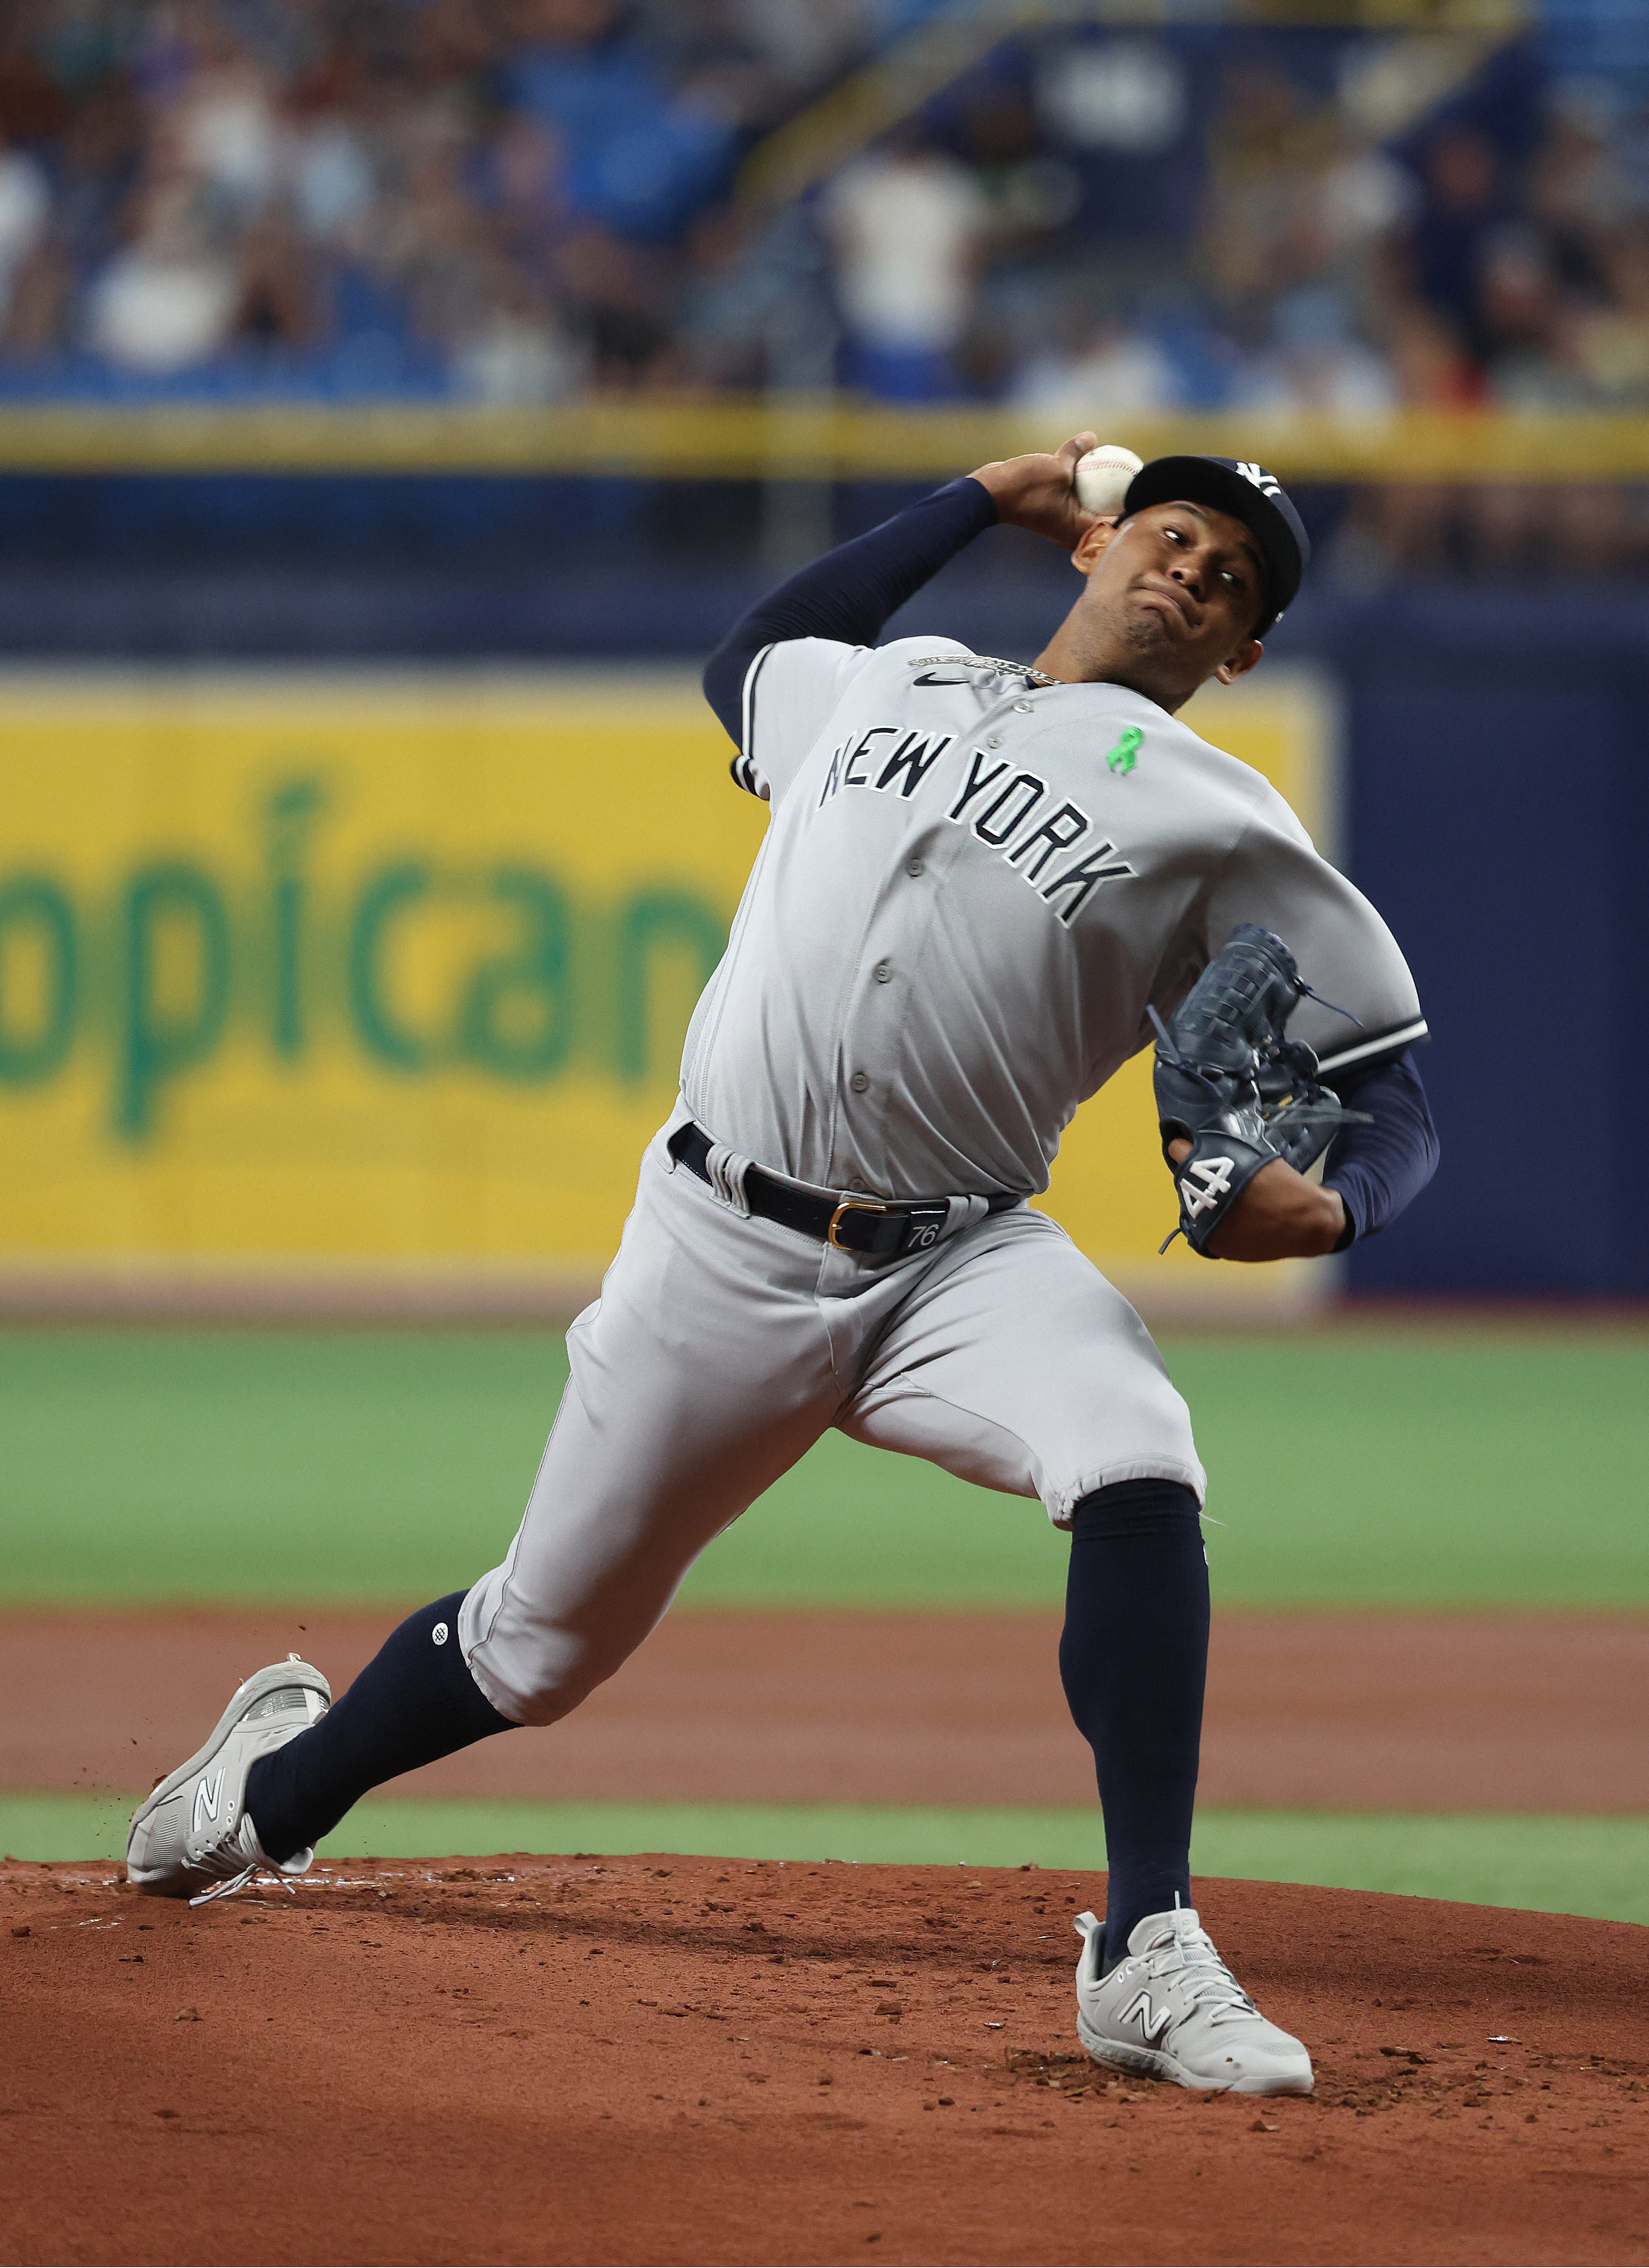 Rays Take Series Opener From Yankees In Wild Fashion